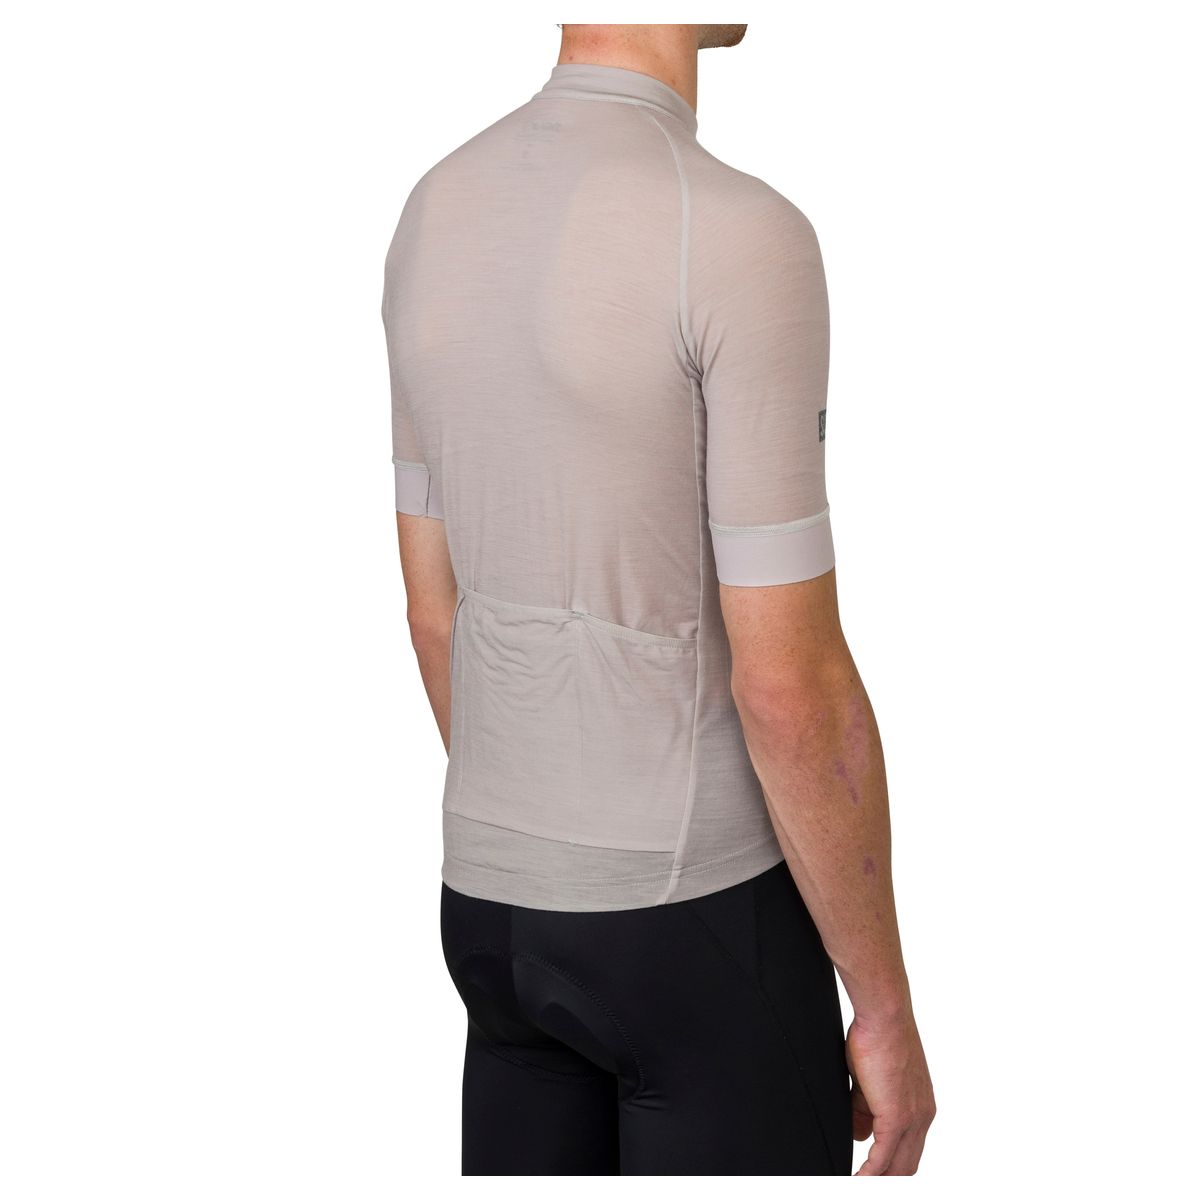 Solid Merino Maillot III SIX6 Hombres fit example